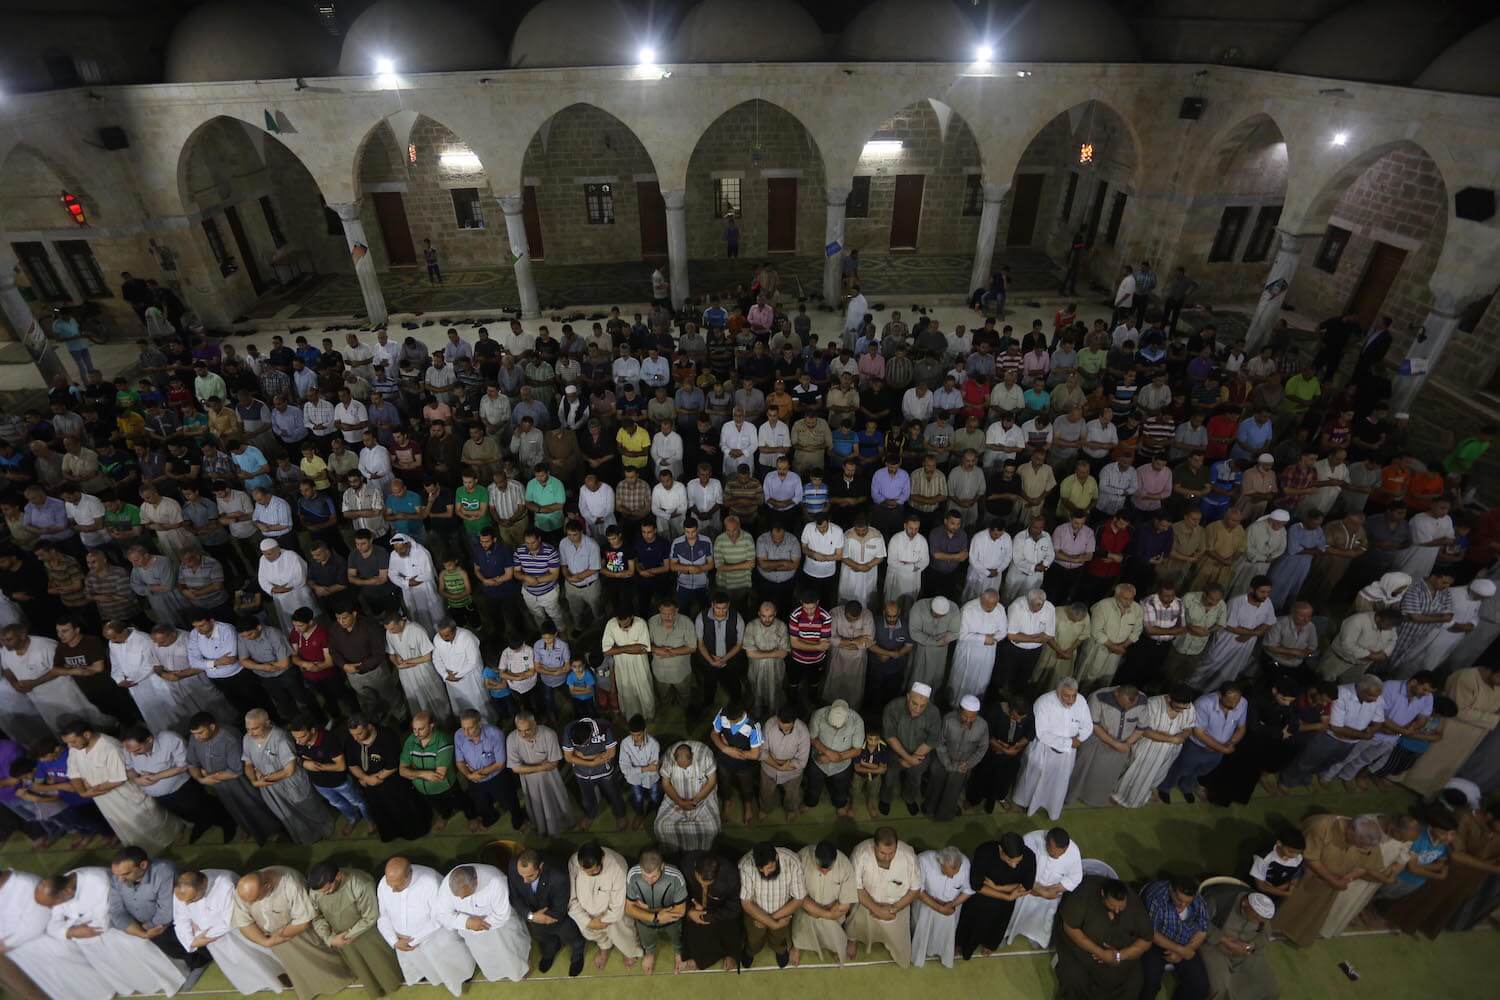 Muslims in Gaza pray inside of a mosque during the religious month of Ramadan, June 2016. (Photo: Mohammed Asad)